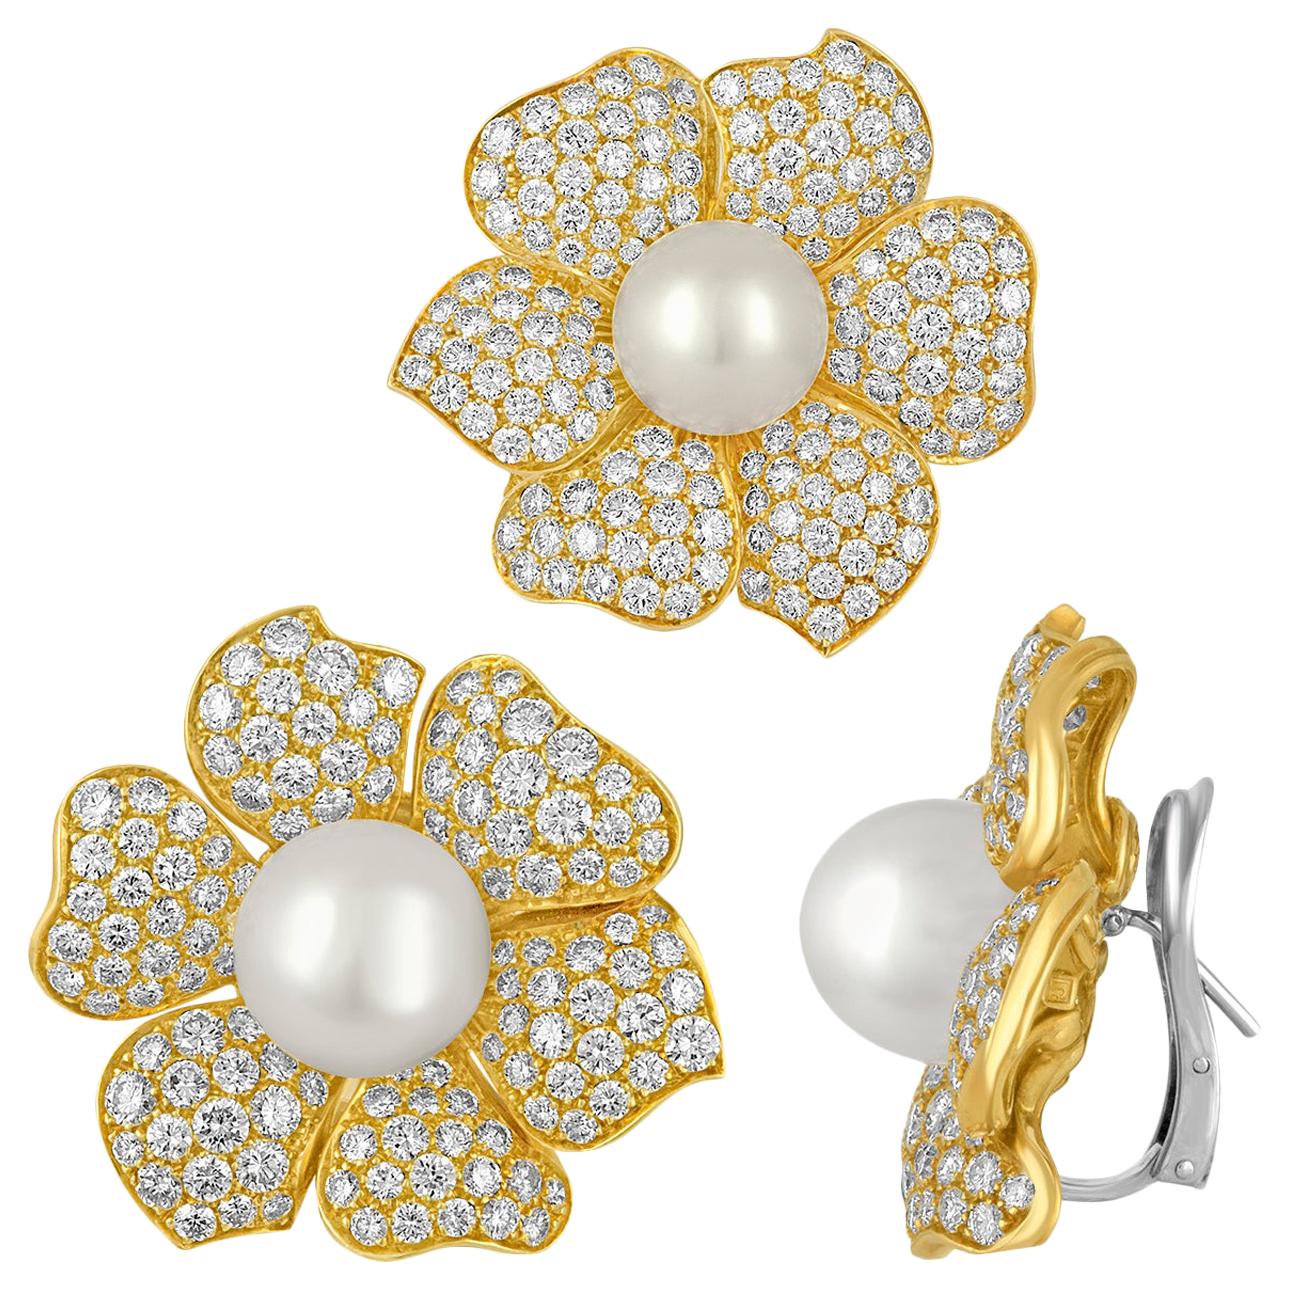 22.00 Carat Diamond South Sea Pearl Gold Flower Earrings and Pin Set